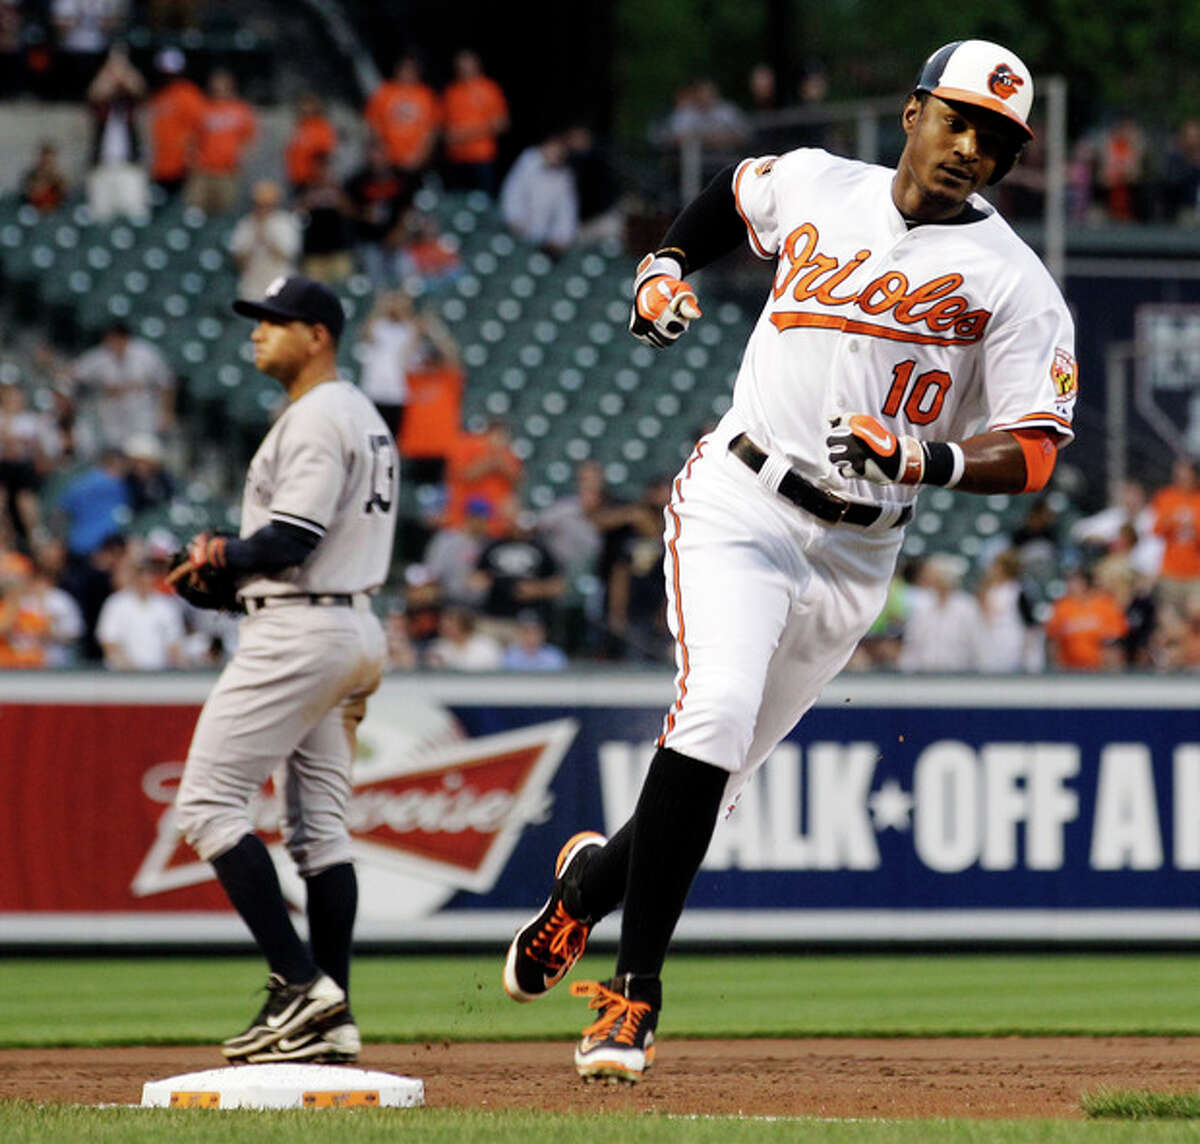 Baltimore Orioles' Adam Jones (10) rounds third base past New York Yankees third baseman Alex Rodriguez after hitting a solo home run in the second inning of a baseball game in Baltimore, Tuesday, May 15, 2012. (AP Photo/Patrick Semansky)